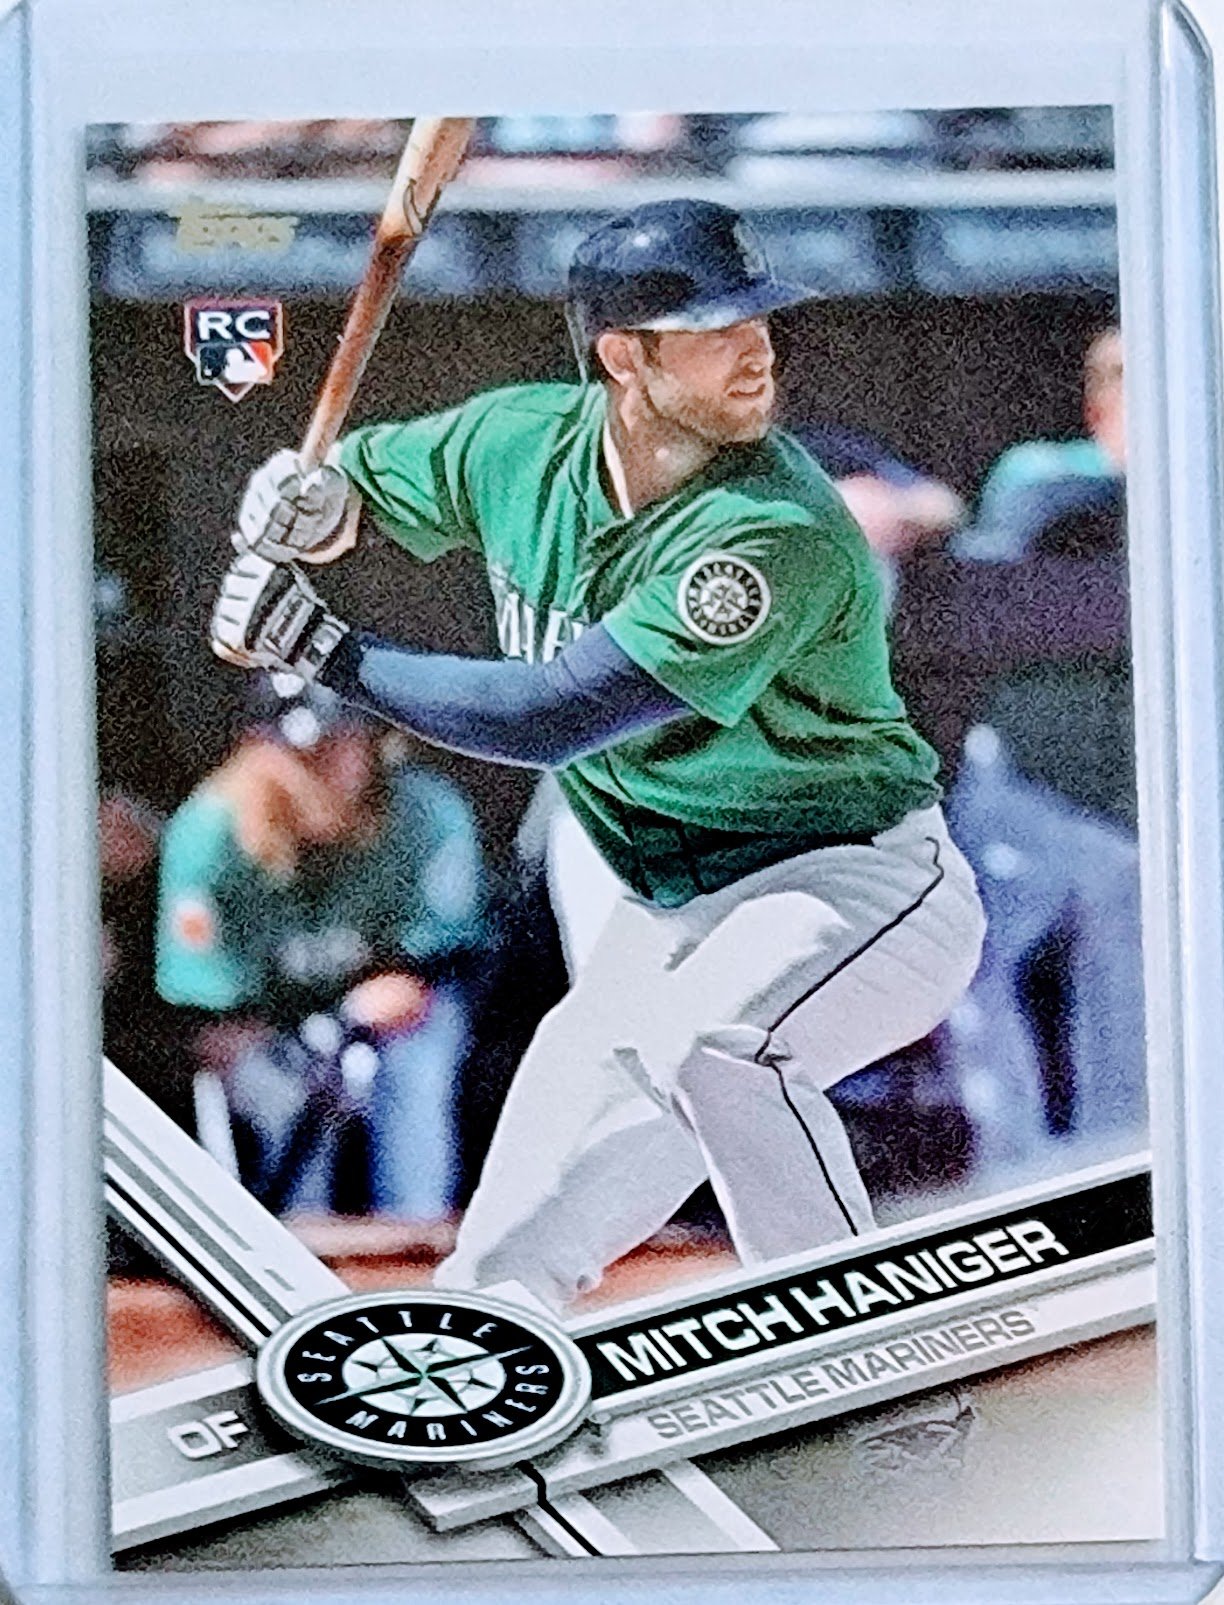 2017 Topps Update Mitch Haniger Rookie Baseball Card TPTV simple Xclusive Collectibles   